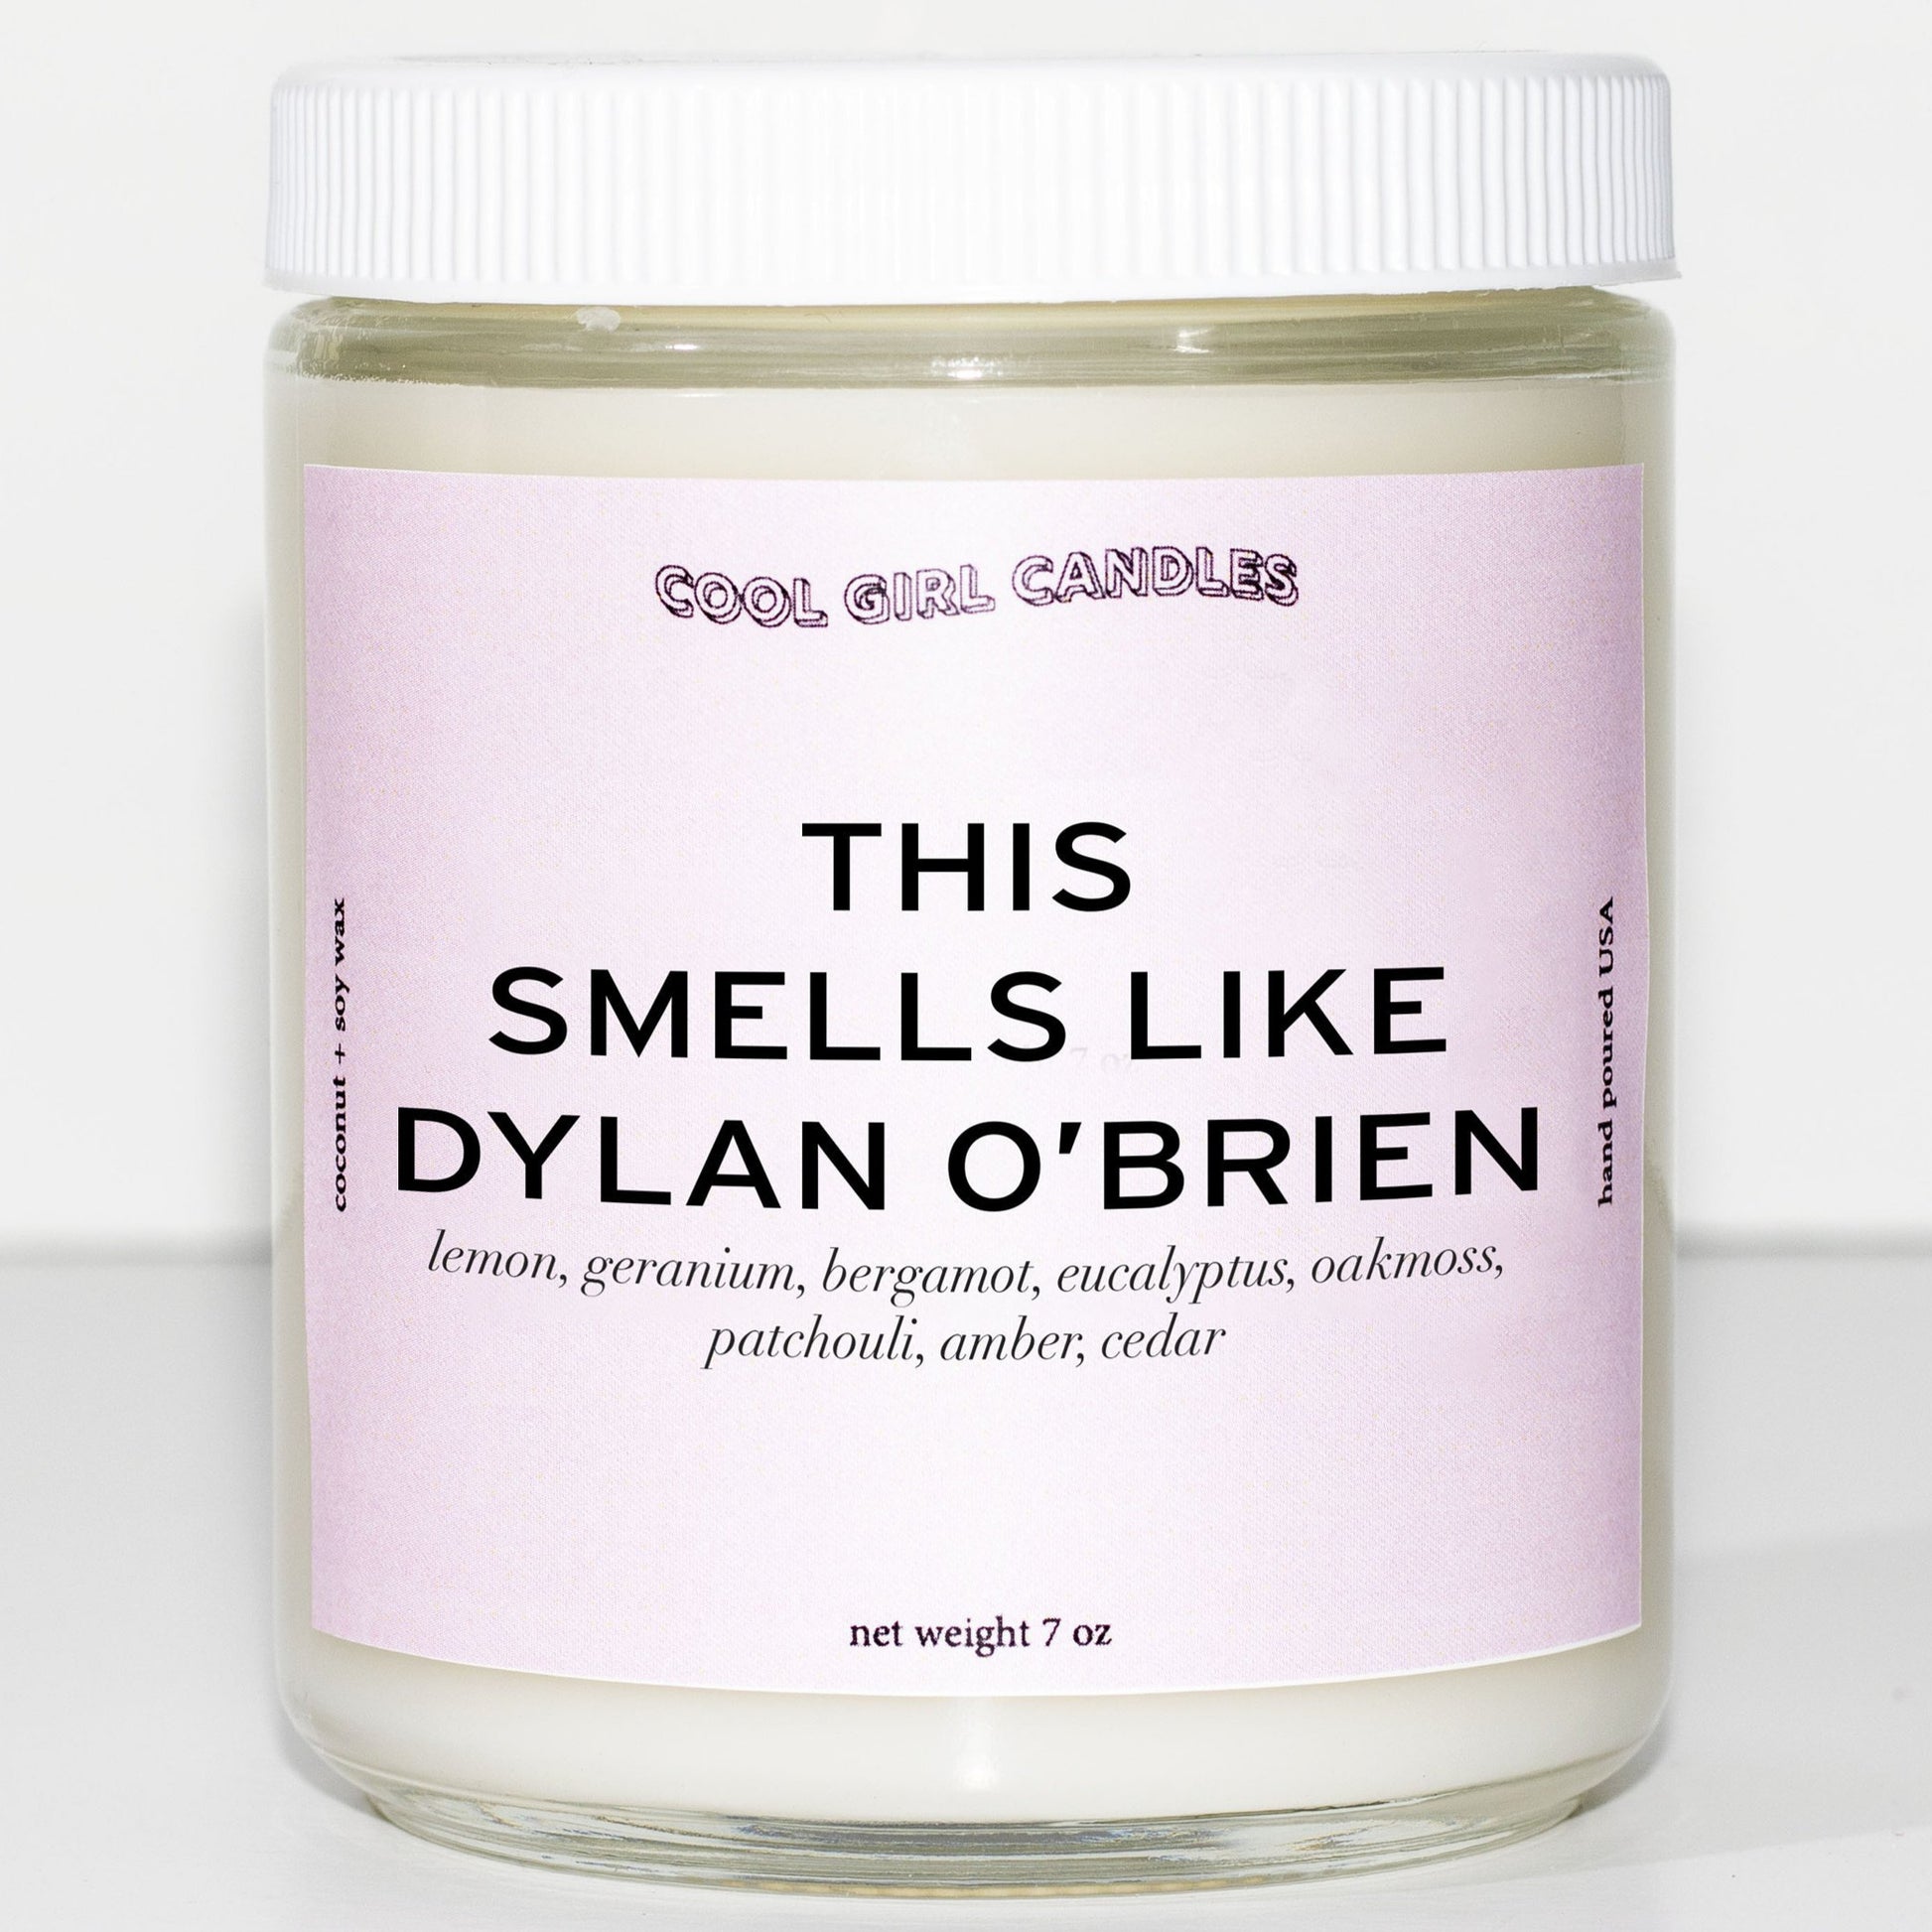 cool girl candles this smells like dylan o'brien candle cute aesthetic pink scented candle hilarious candle dealers aesthetic room decor dylan o'brien merch